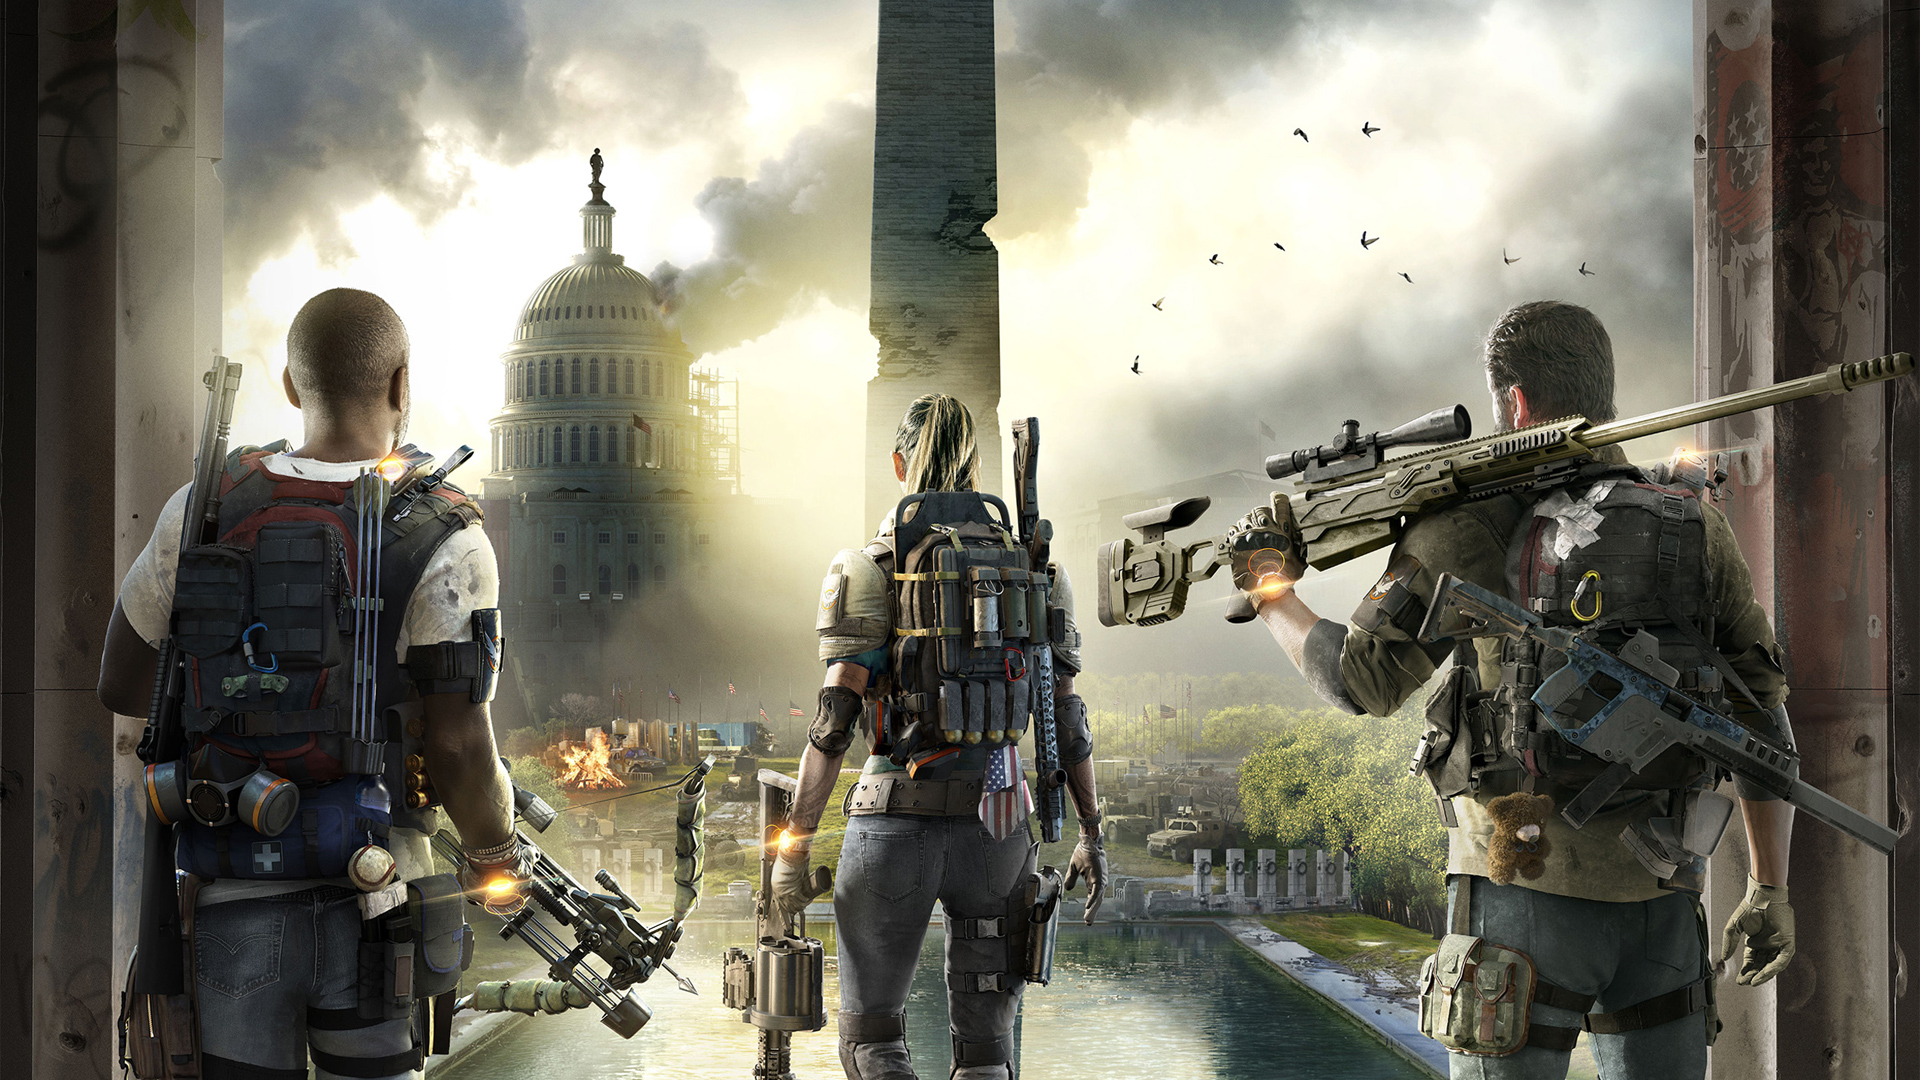 Washington In Ruins Wallpaper From Tom Clancys The Division 2